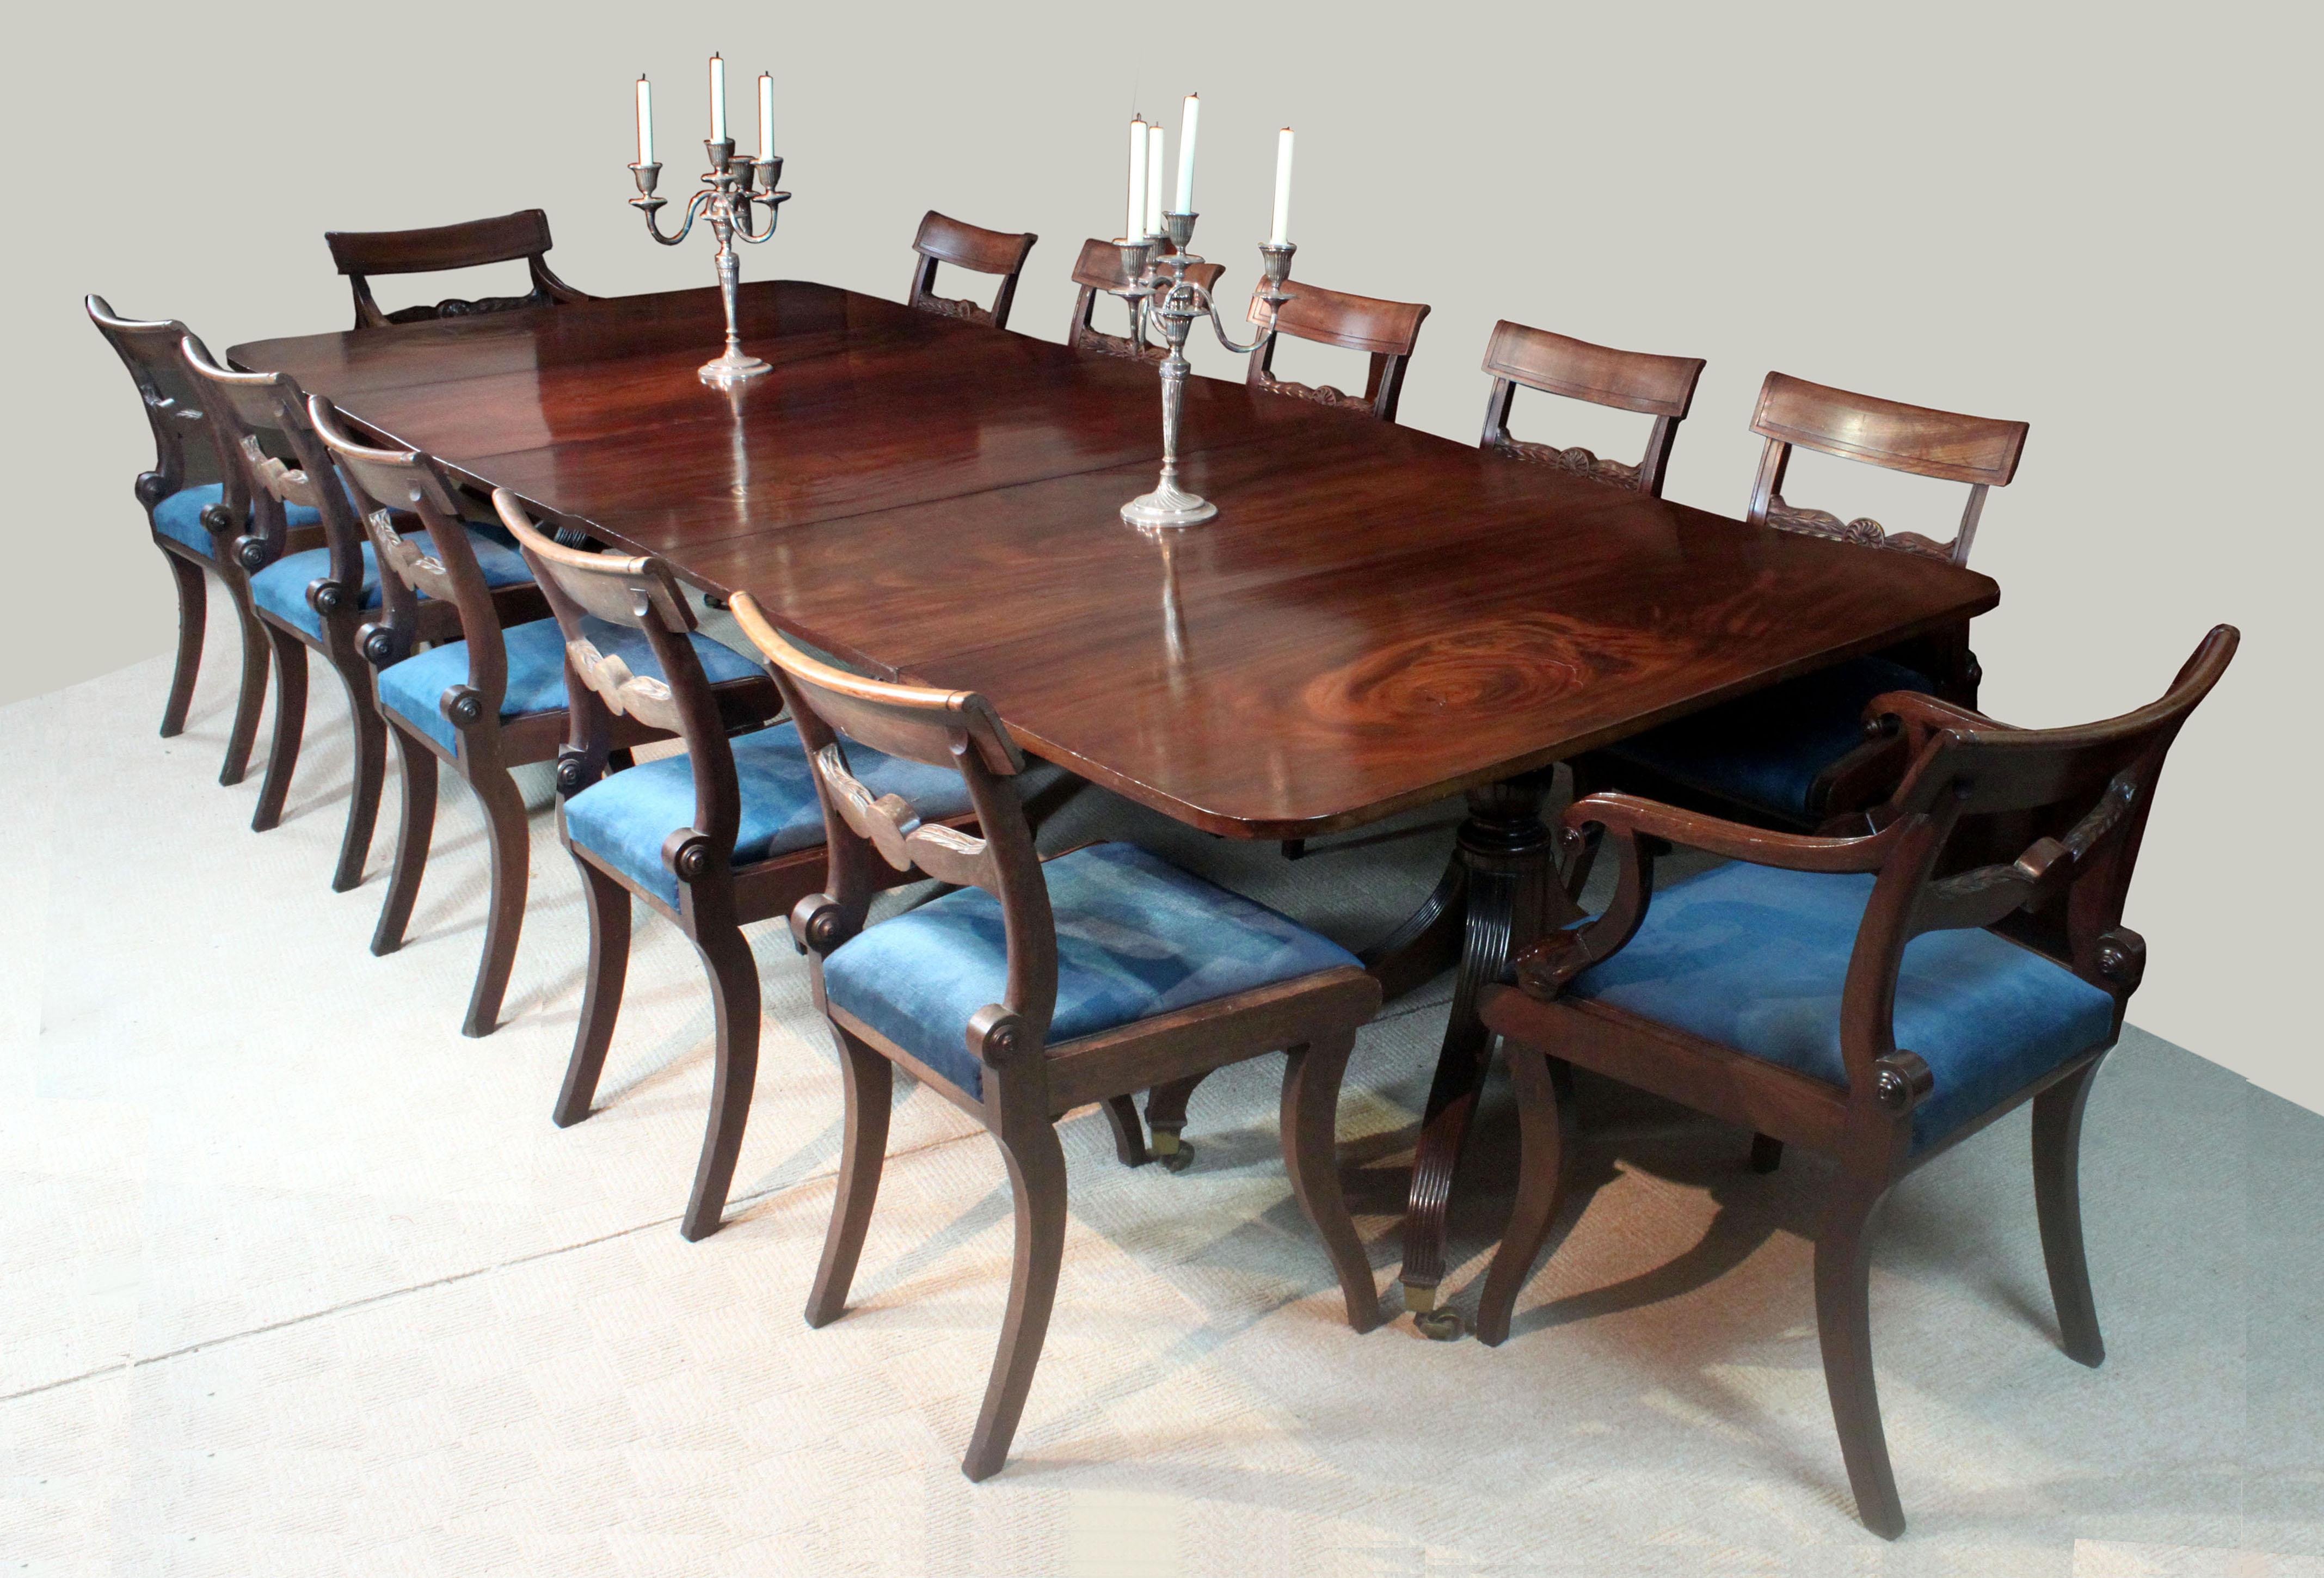 Late 18th Century Mahogany Three Pillar Dining Table
A fine late 18th century three pillar dining table with four handsome umbrella shaped legs, gun barrel stems and original cup castors on each pillar. The top is in particularly well figured